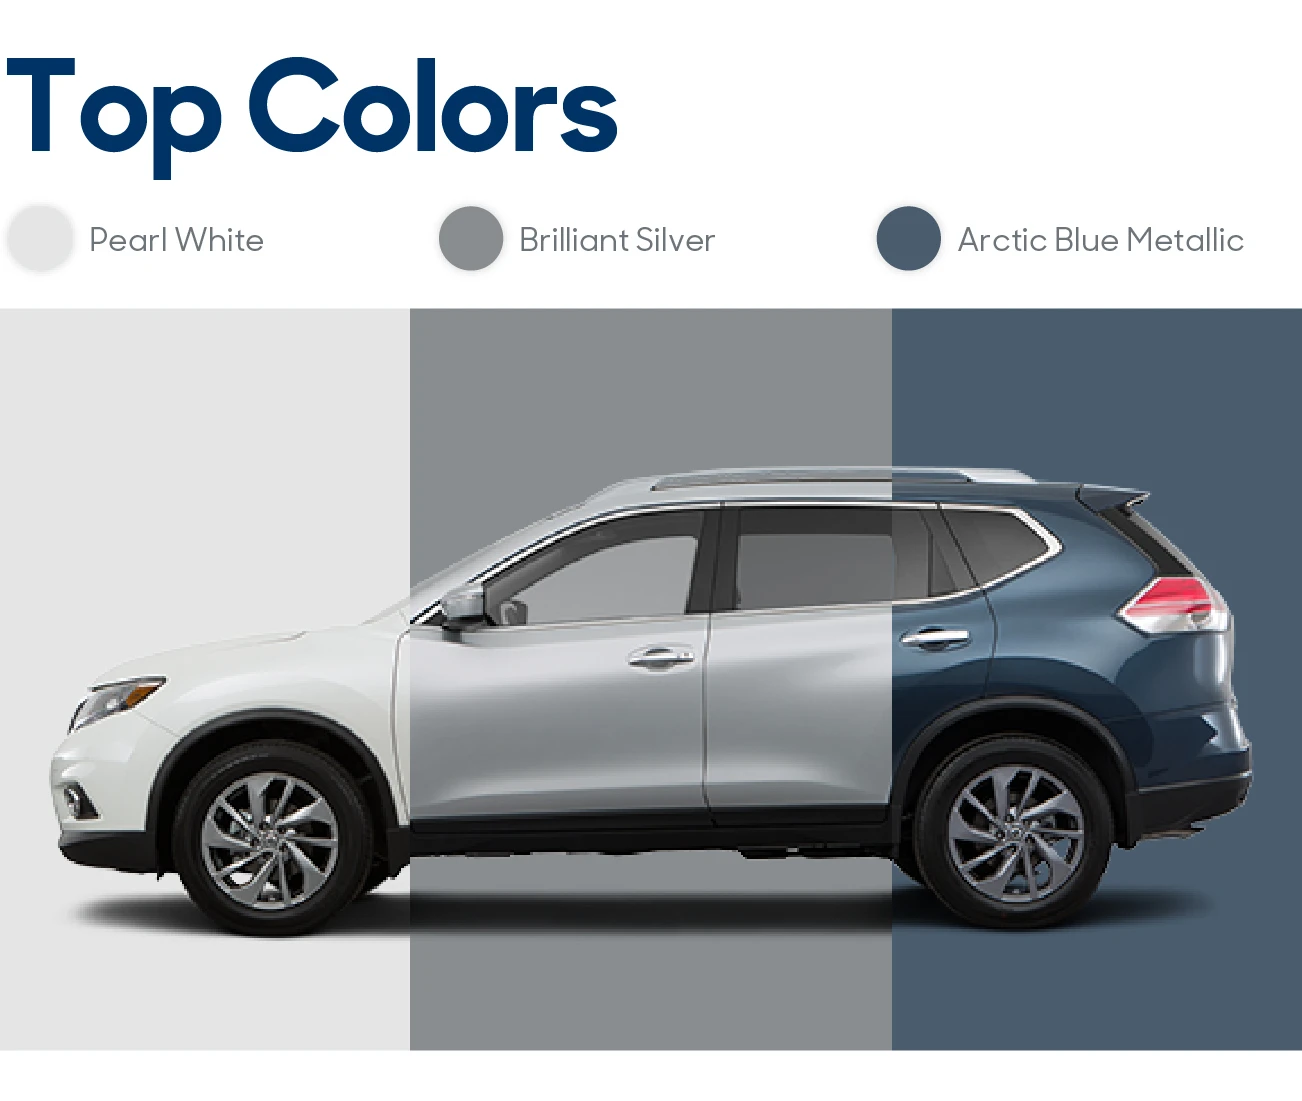 2015 Nissan Rogue: Reviews, Photos, and More: Available Colors | CarMax